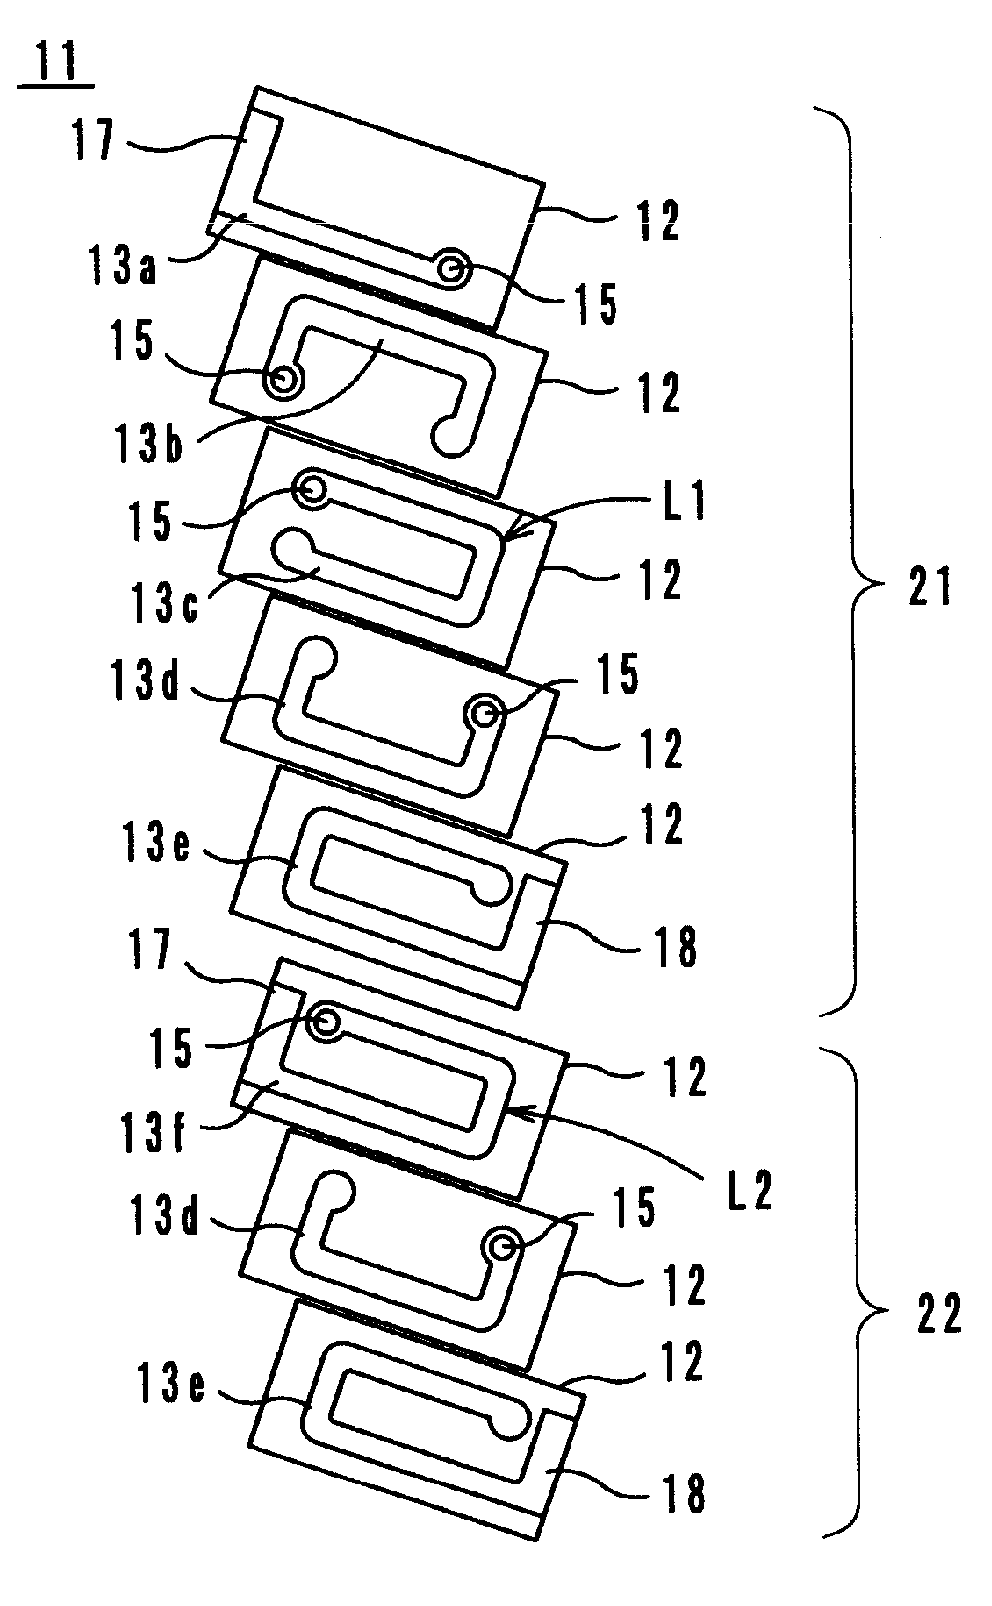 Multilayer coil component